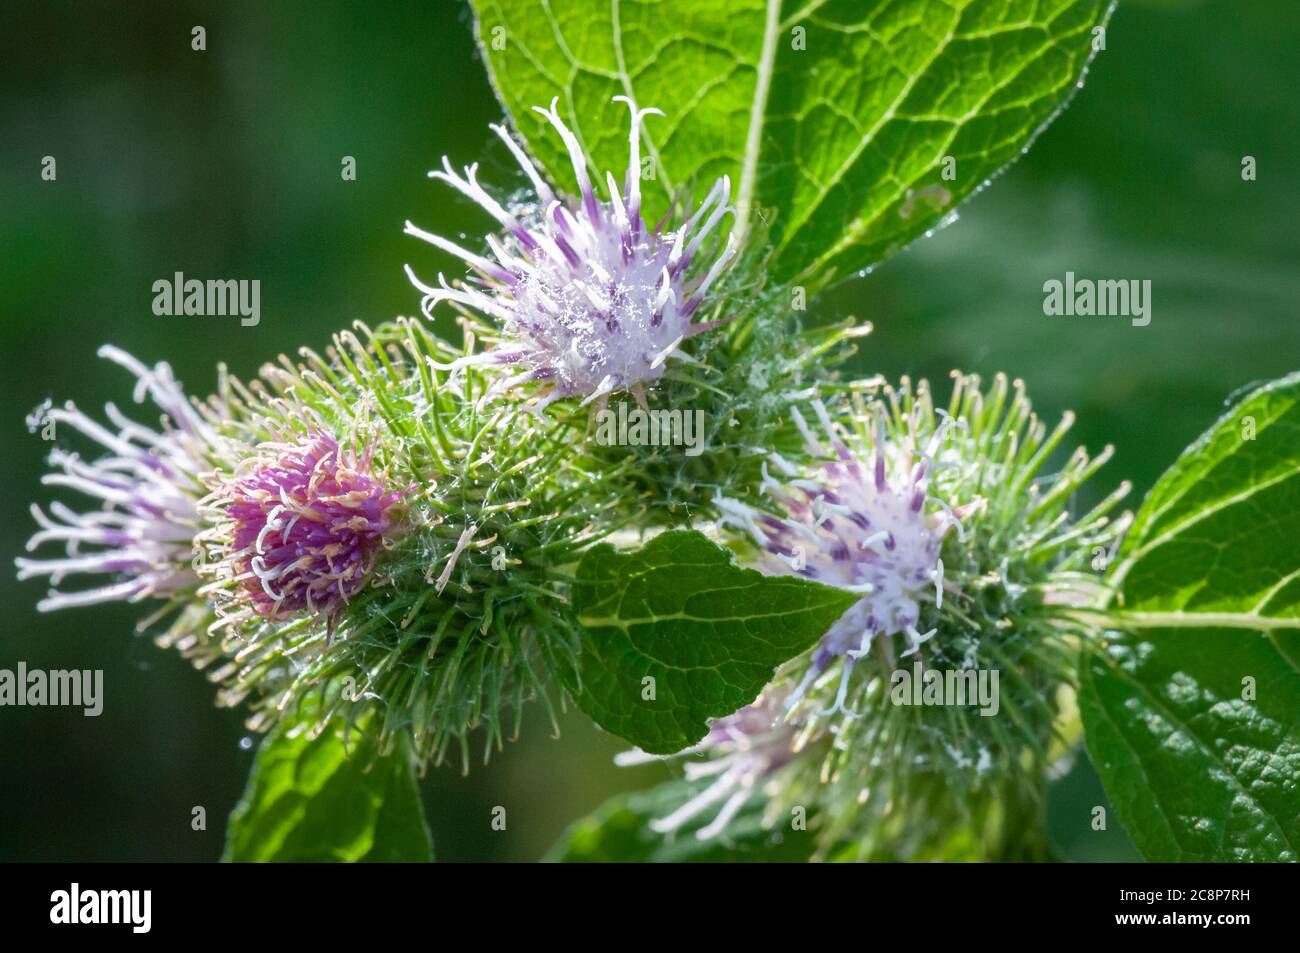 A summer close up image a group of flowering heads of Arctium minus or Common Burdock, also known as Lesser Burdock and Little Burdock. 24 July 2020 Stock Photo